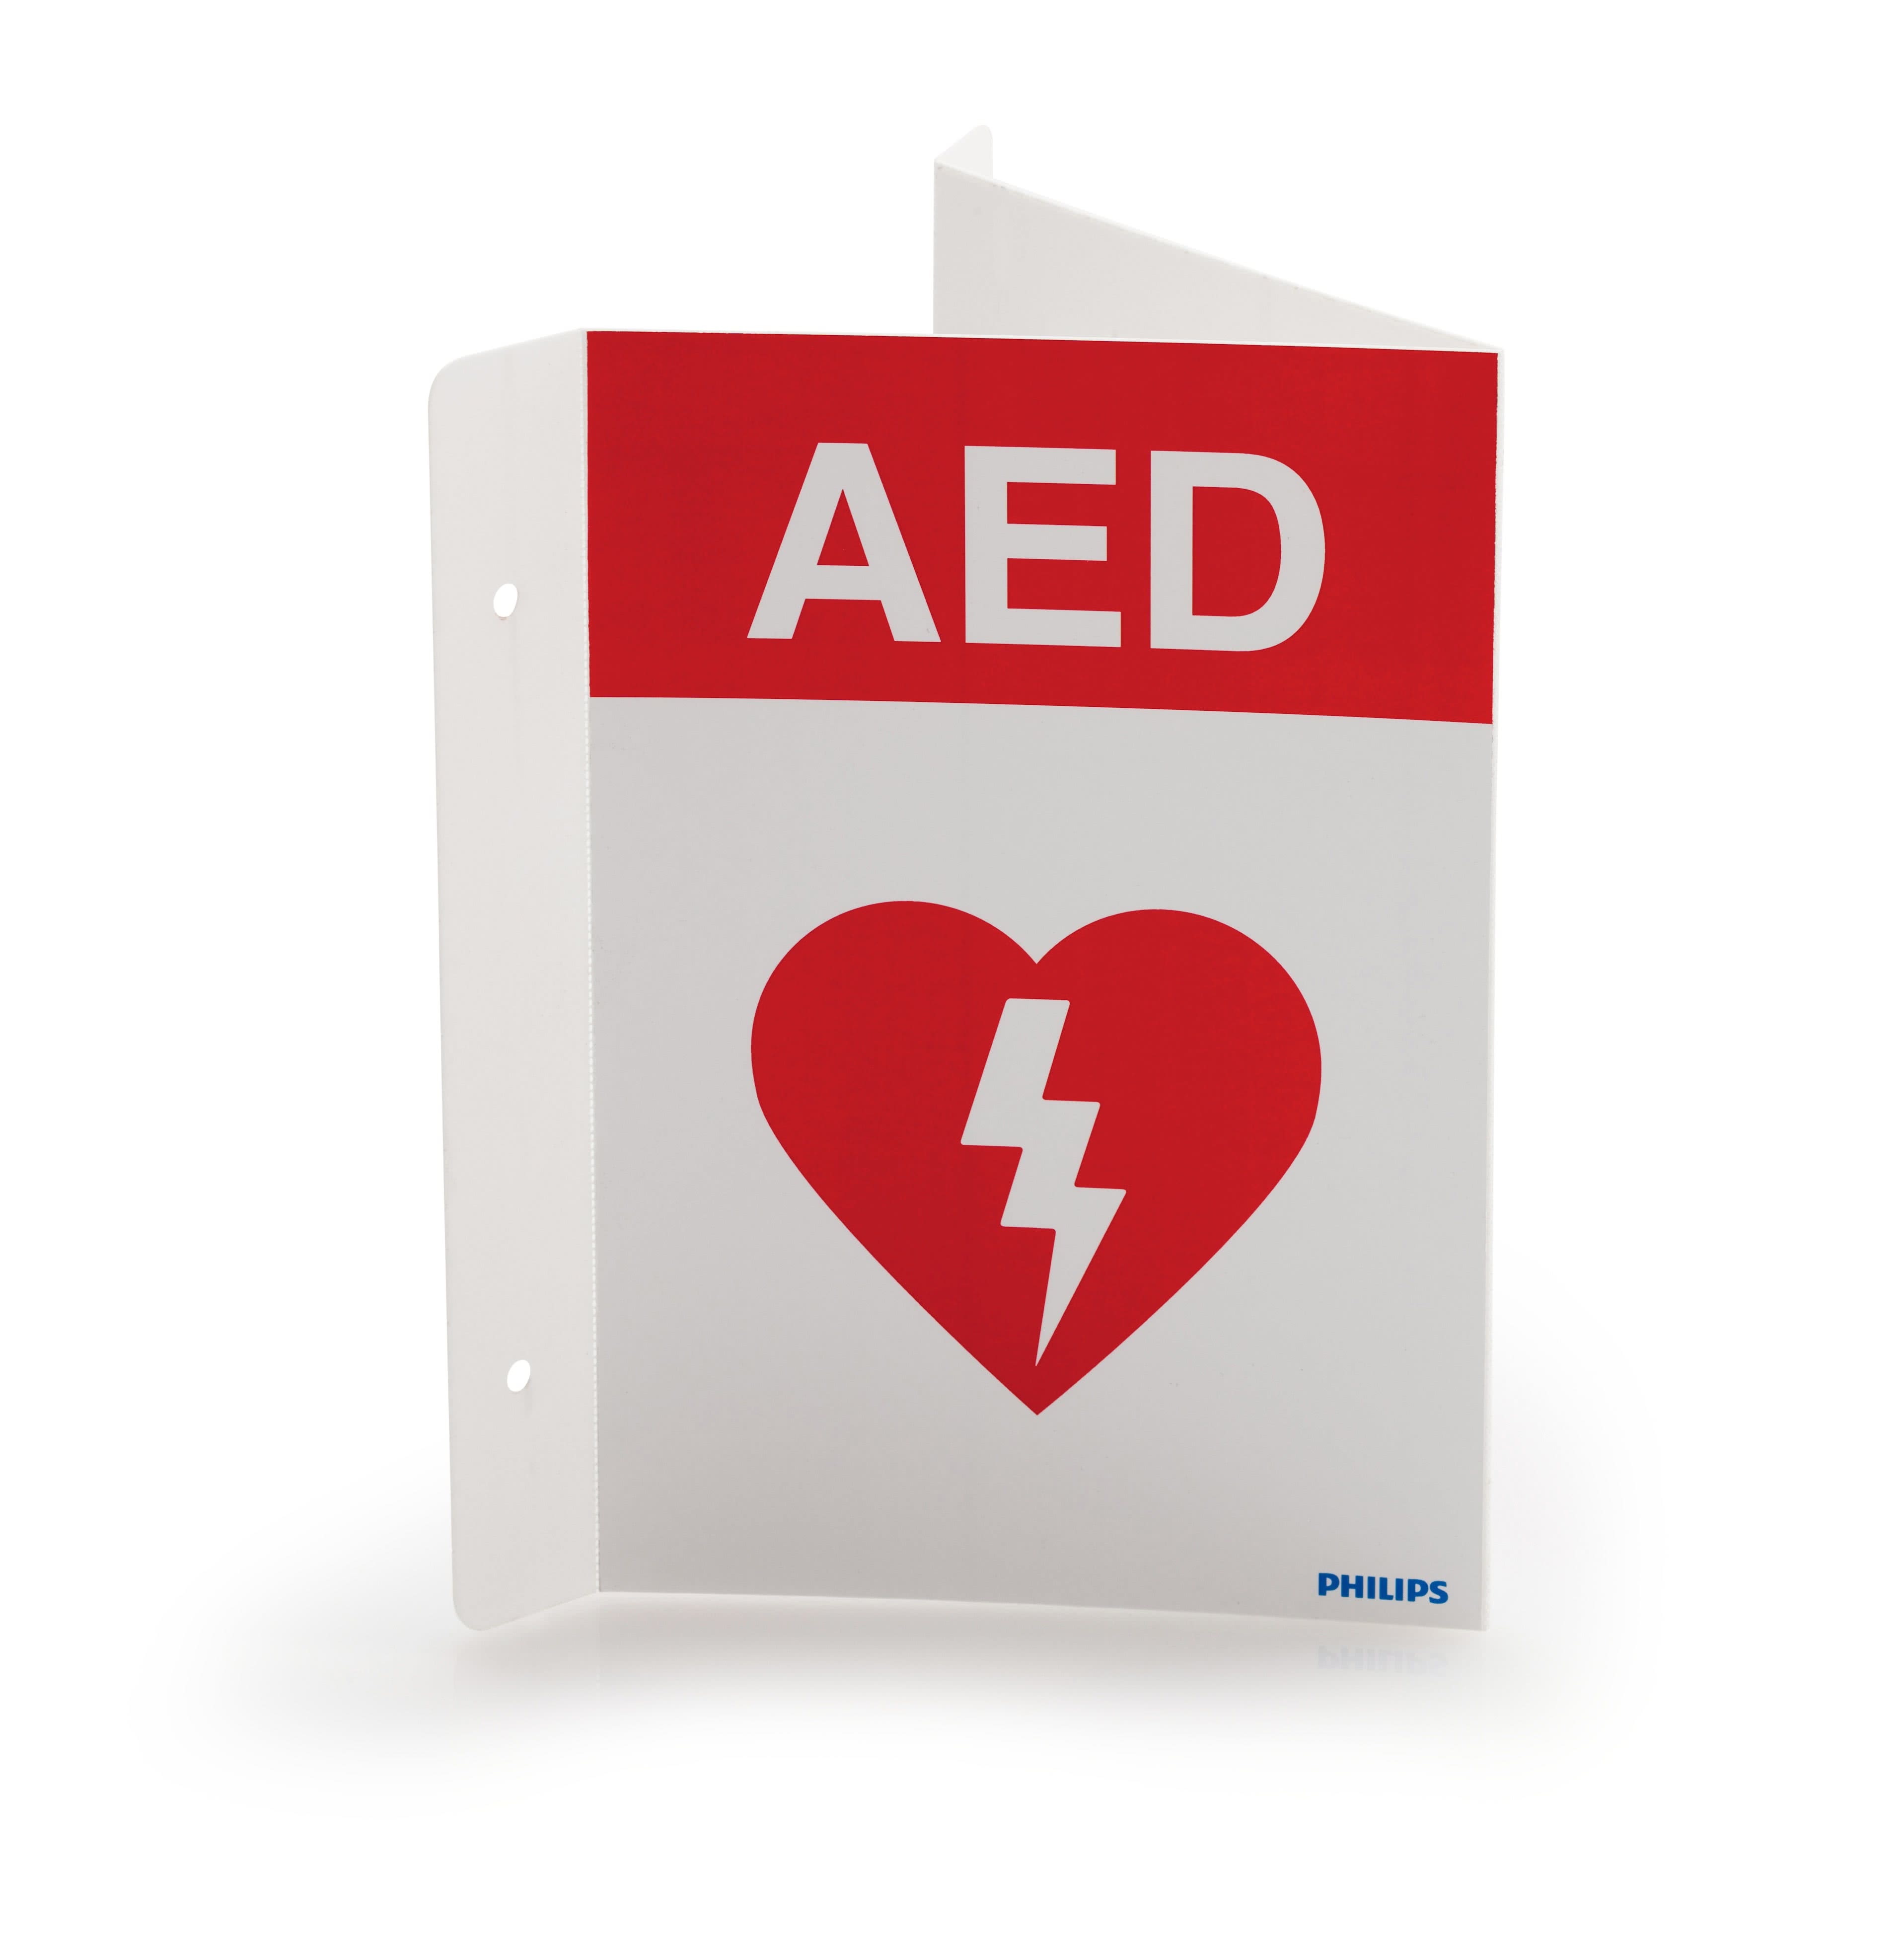 Powerheart G3 Plus AED Package with Cabinet image